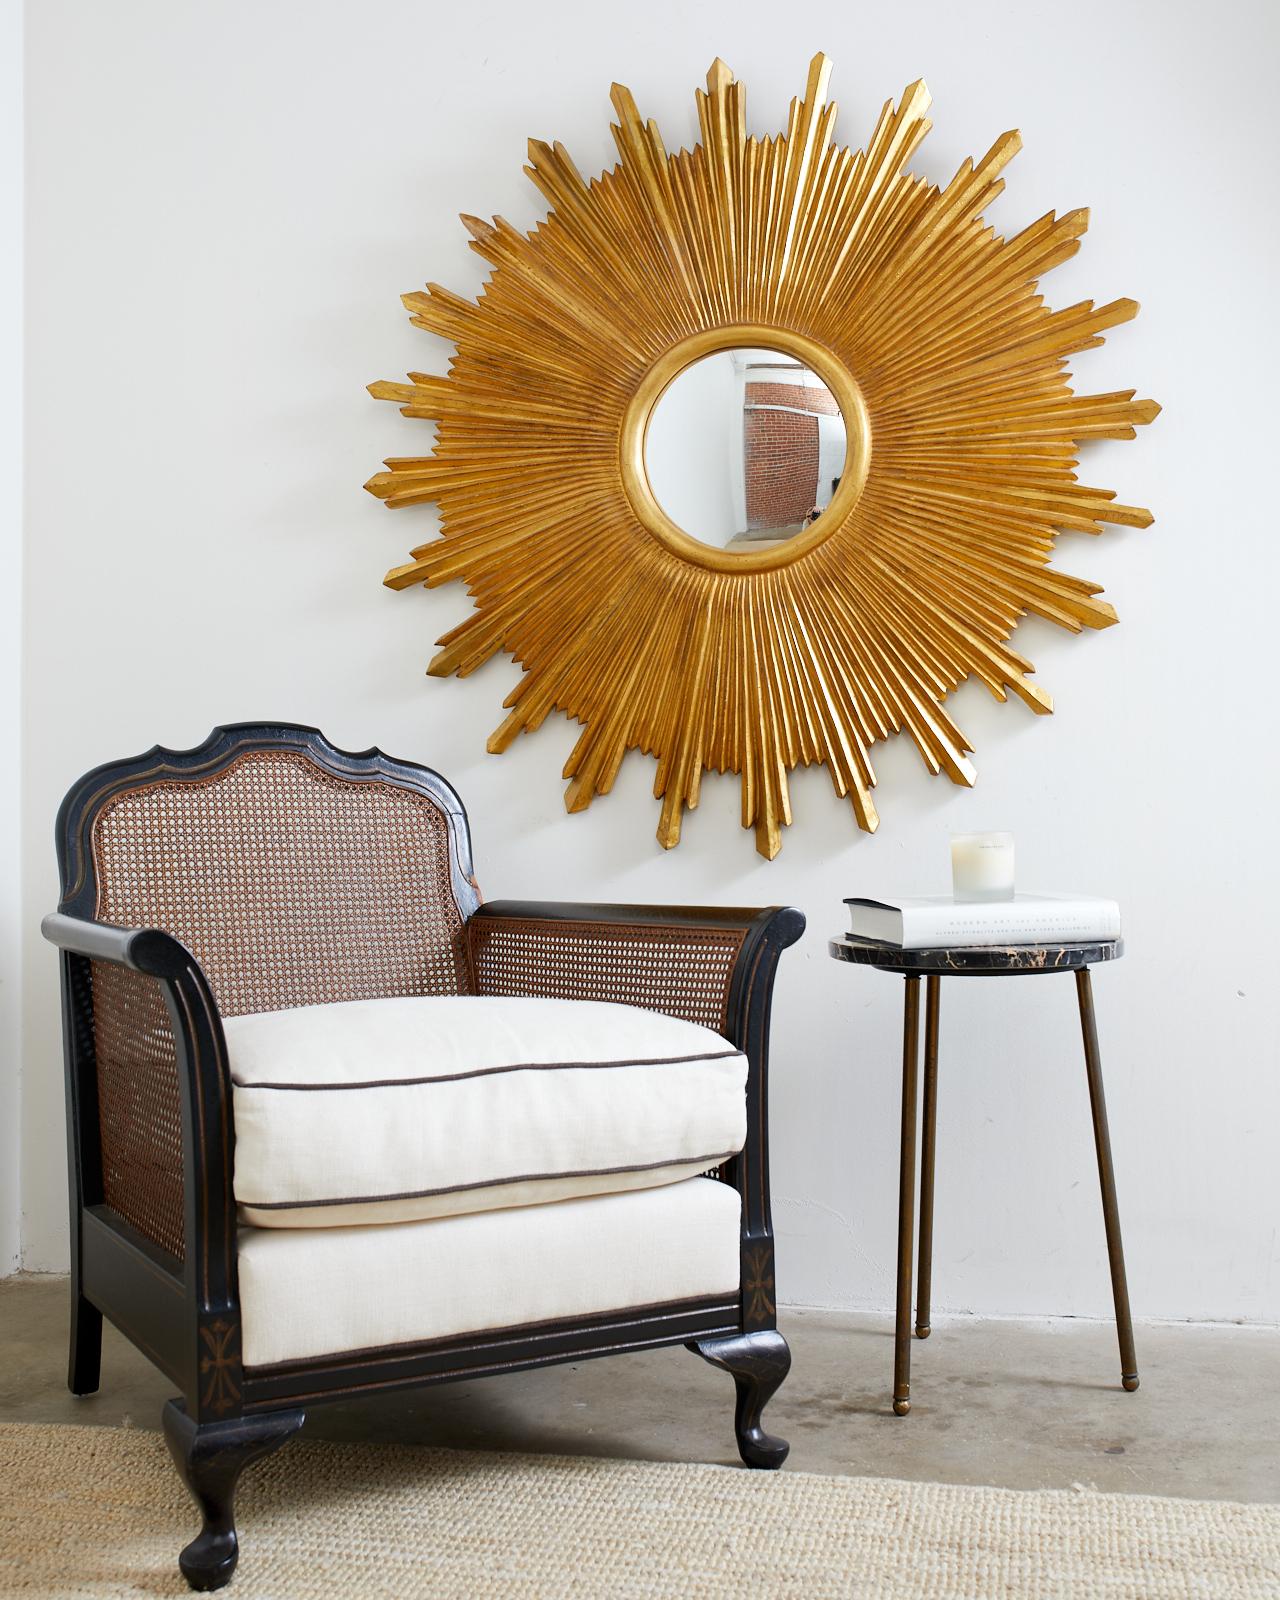 Dramatic large handcrafted giltwood sunburst mirror with a convex looking glass. Made by Carvers Guild featuring a carved frame with angular facets covered in gold leaf. Over four feet in diameter that commands your attention and draws you in with a